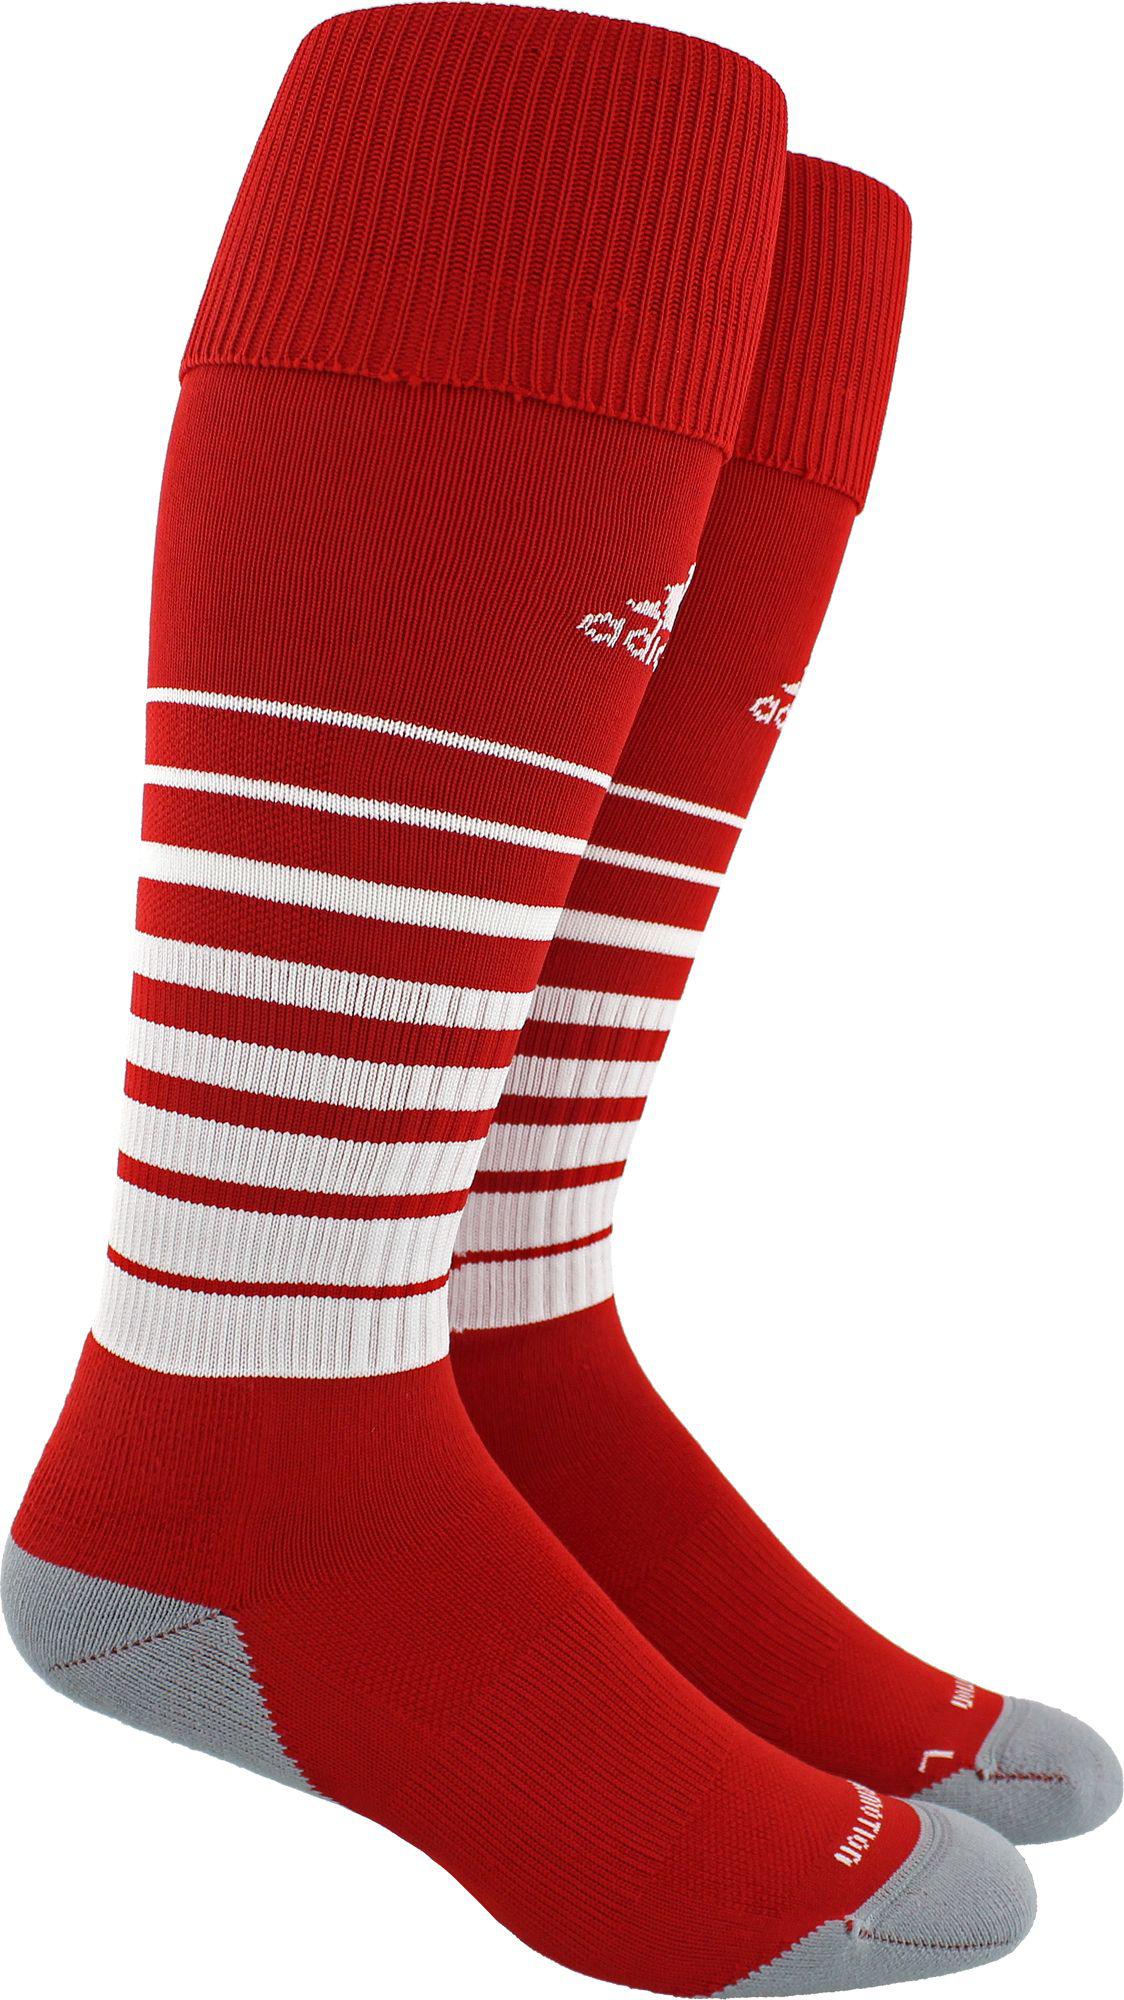 Lyst - adidas Team Speed Soccer Socks in Red for Men - Save 31%